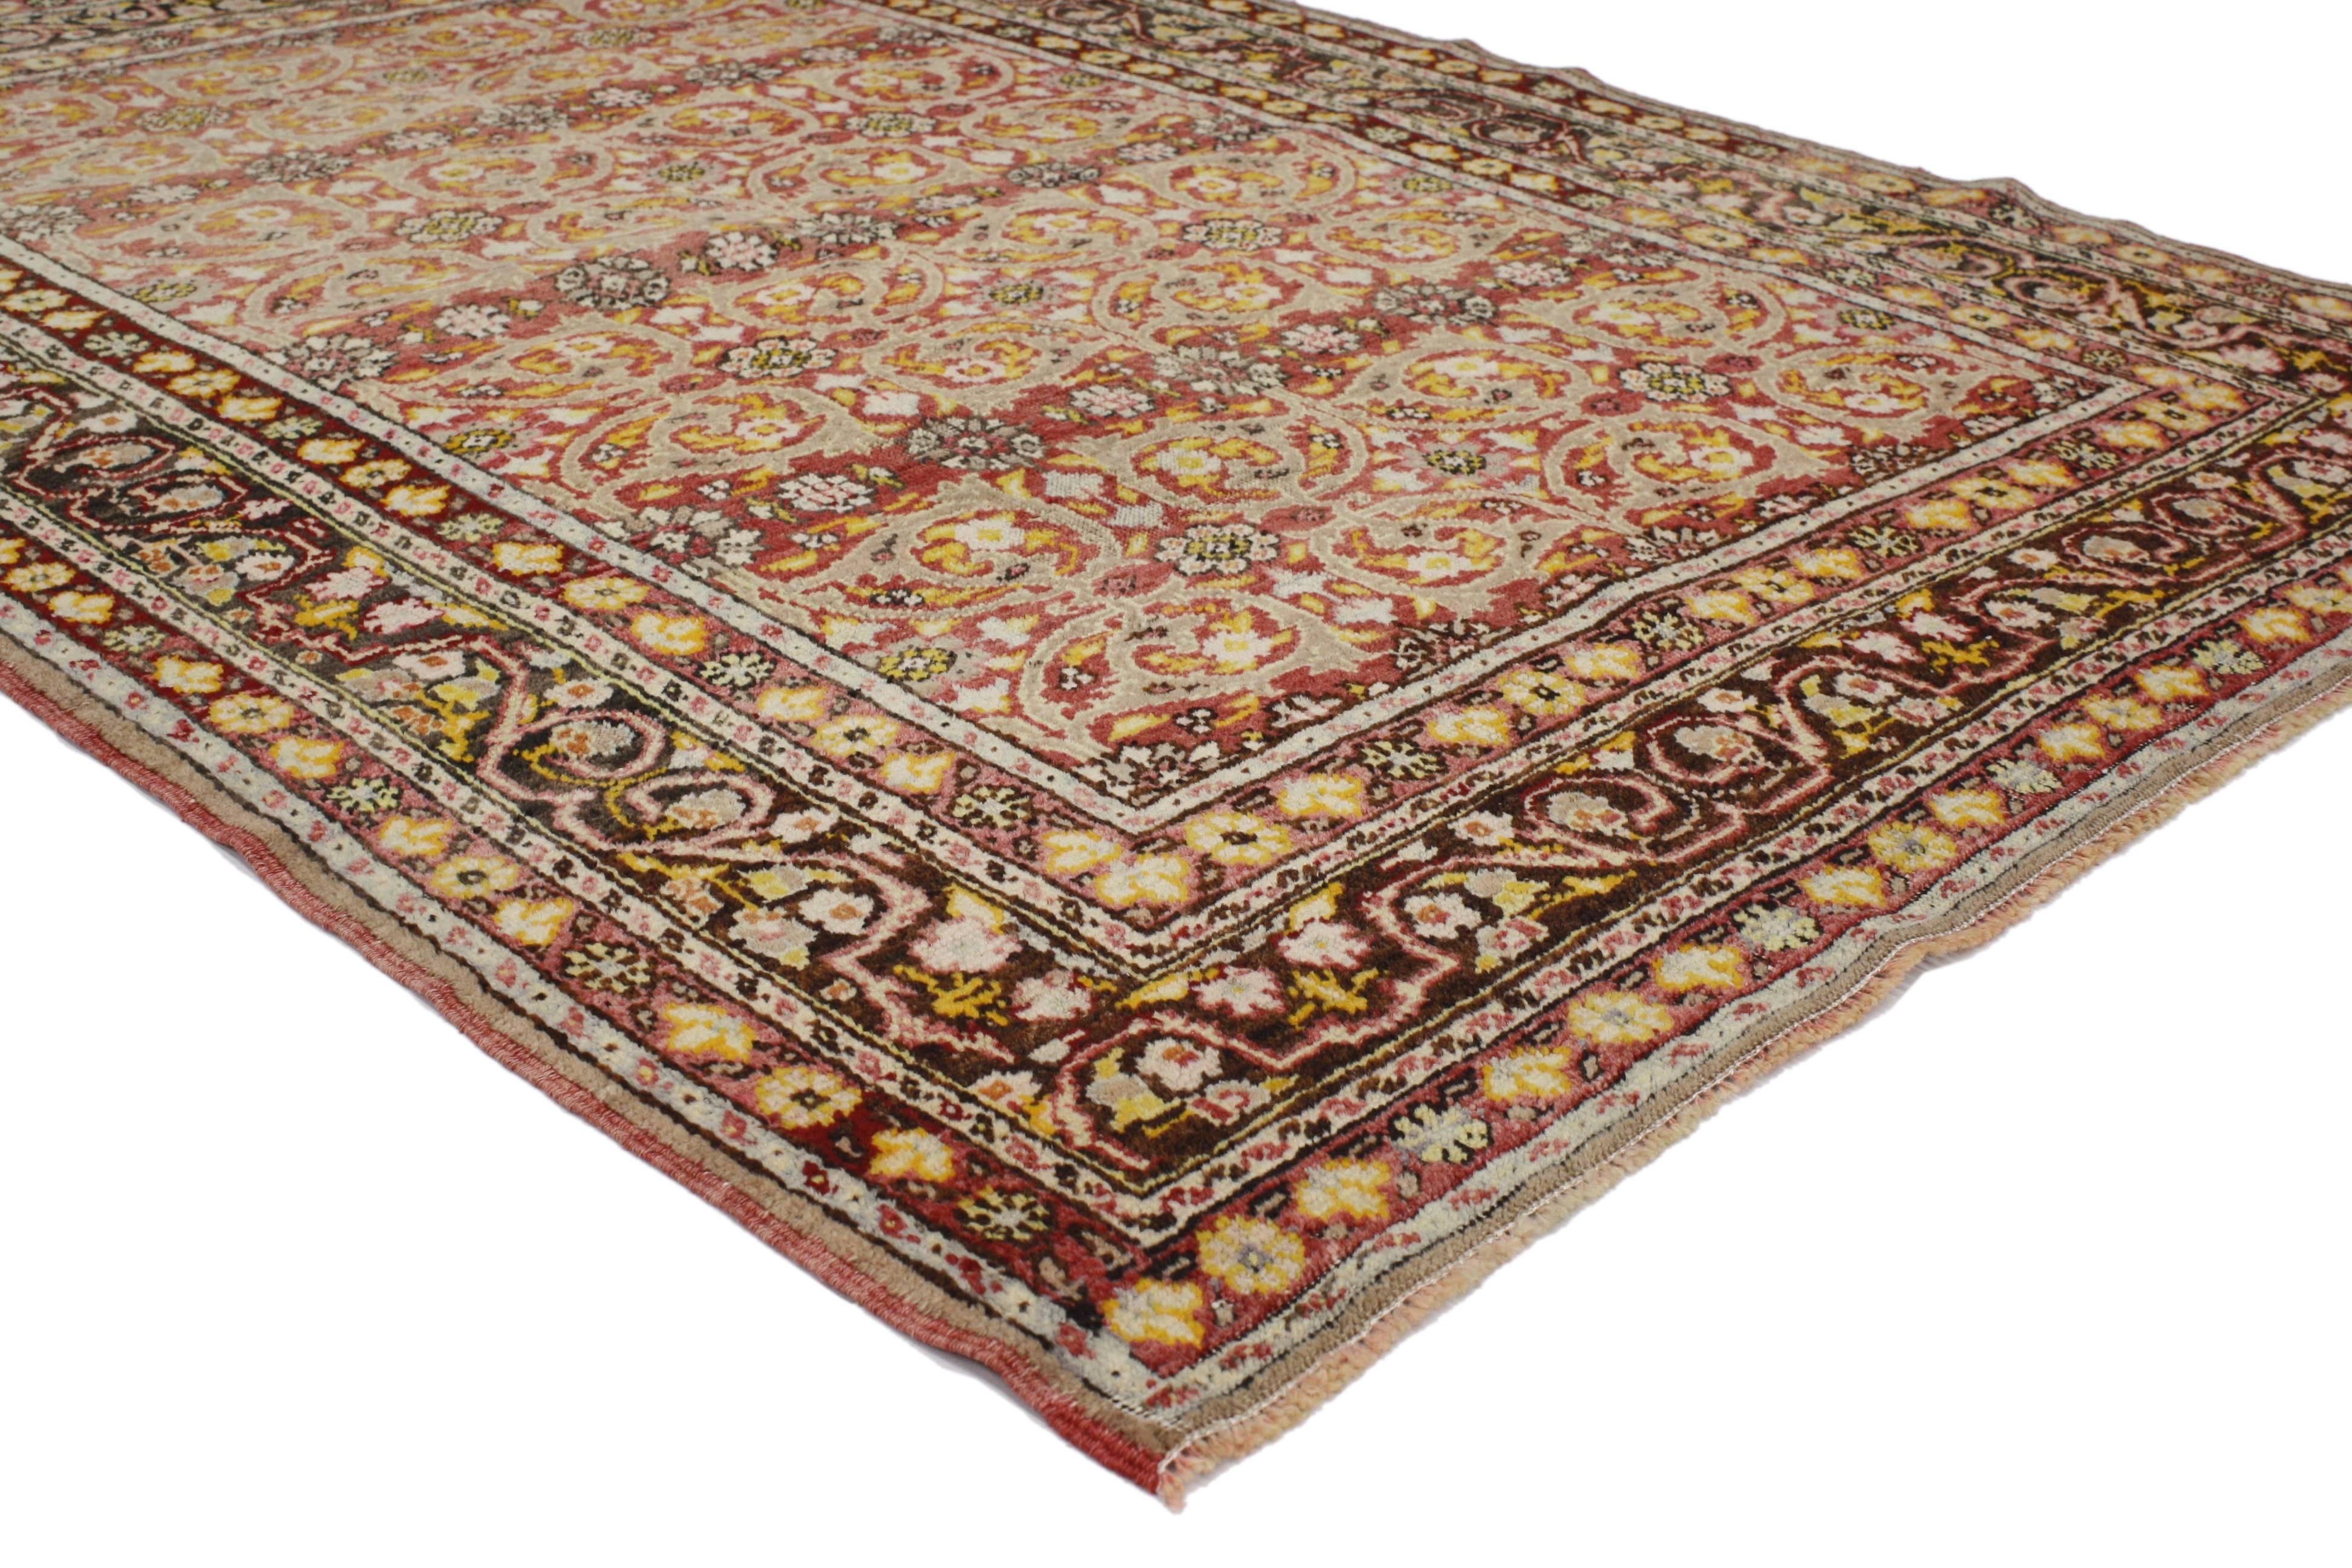 This vintage Turkish Oushak rug with traditional style has many layers that perform well together. The allover design features arabesque vine scrolls and geometric florals surrounded by a complementary border. Rendered in variegated shades of red,